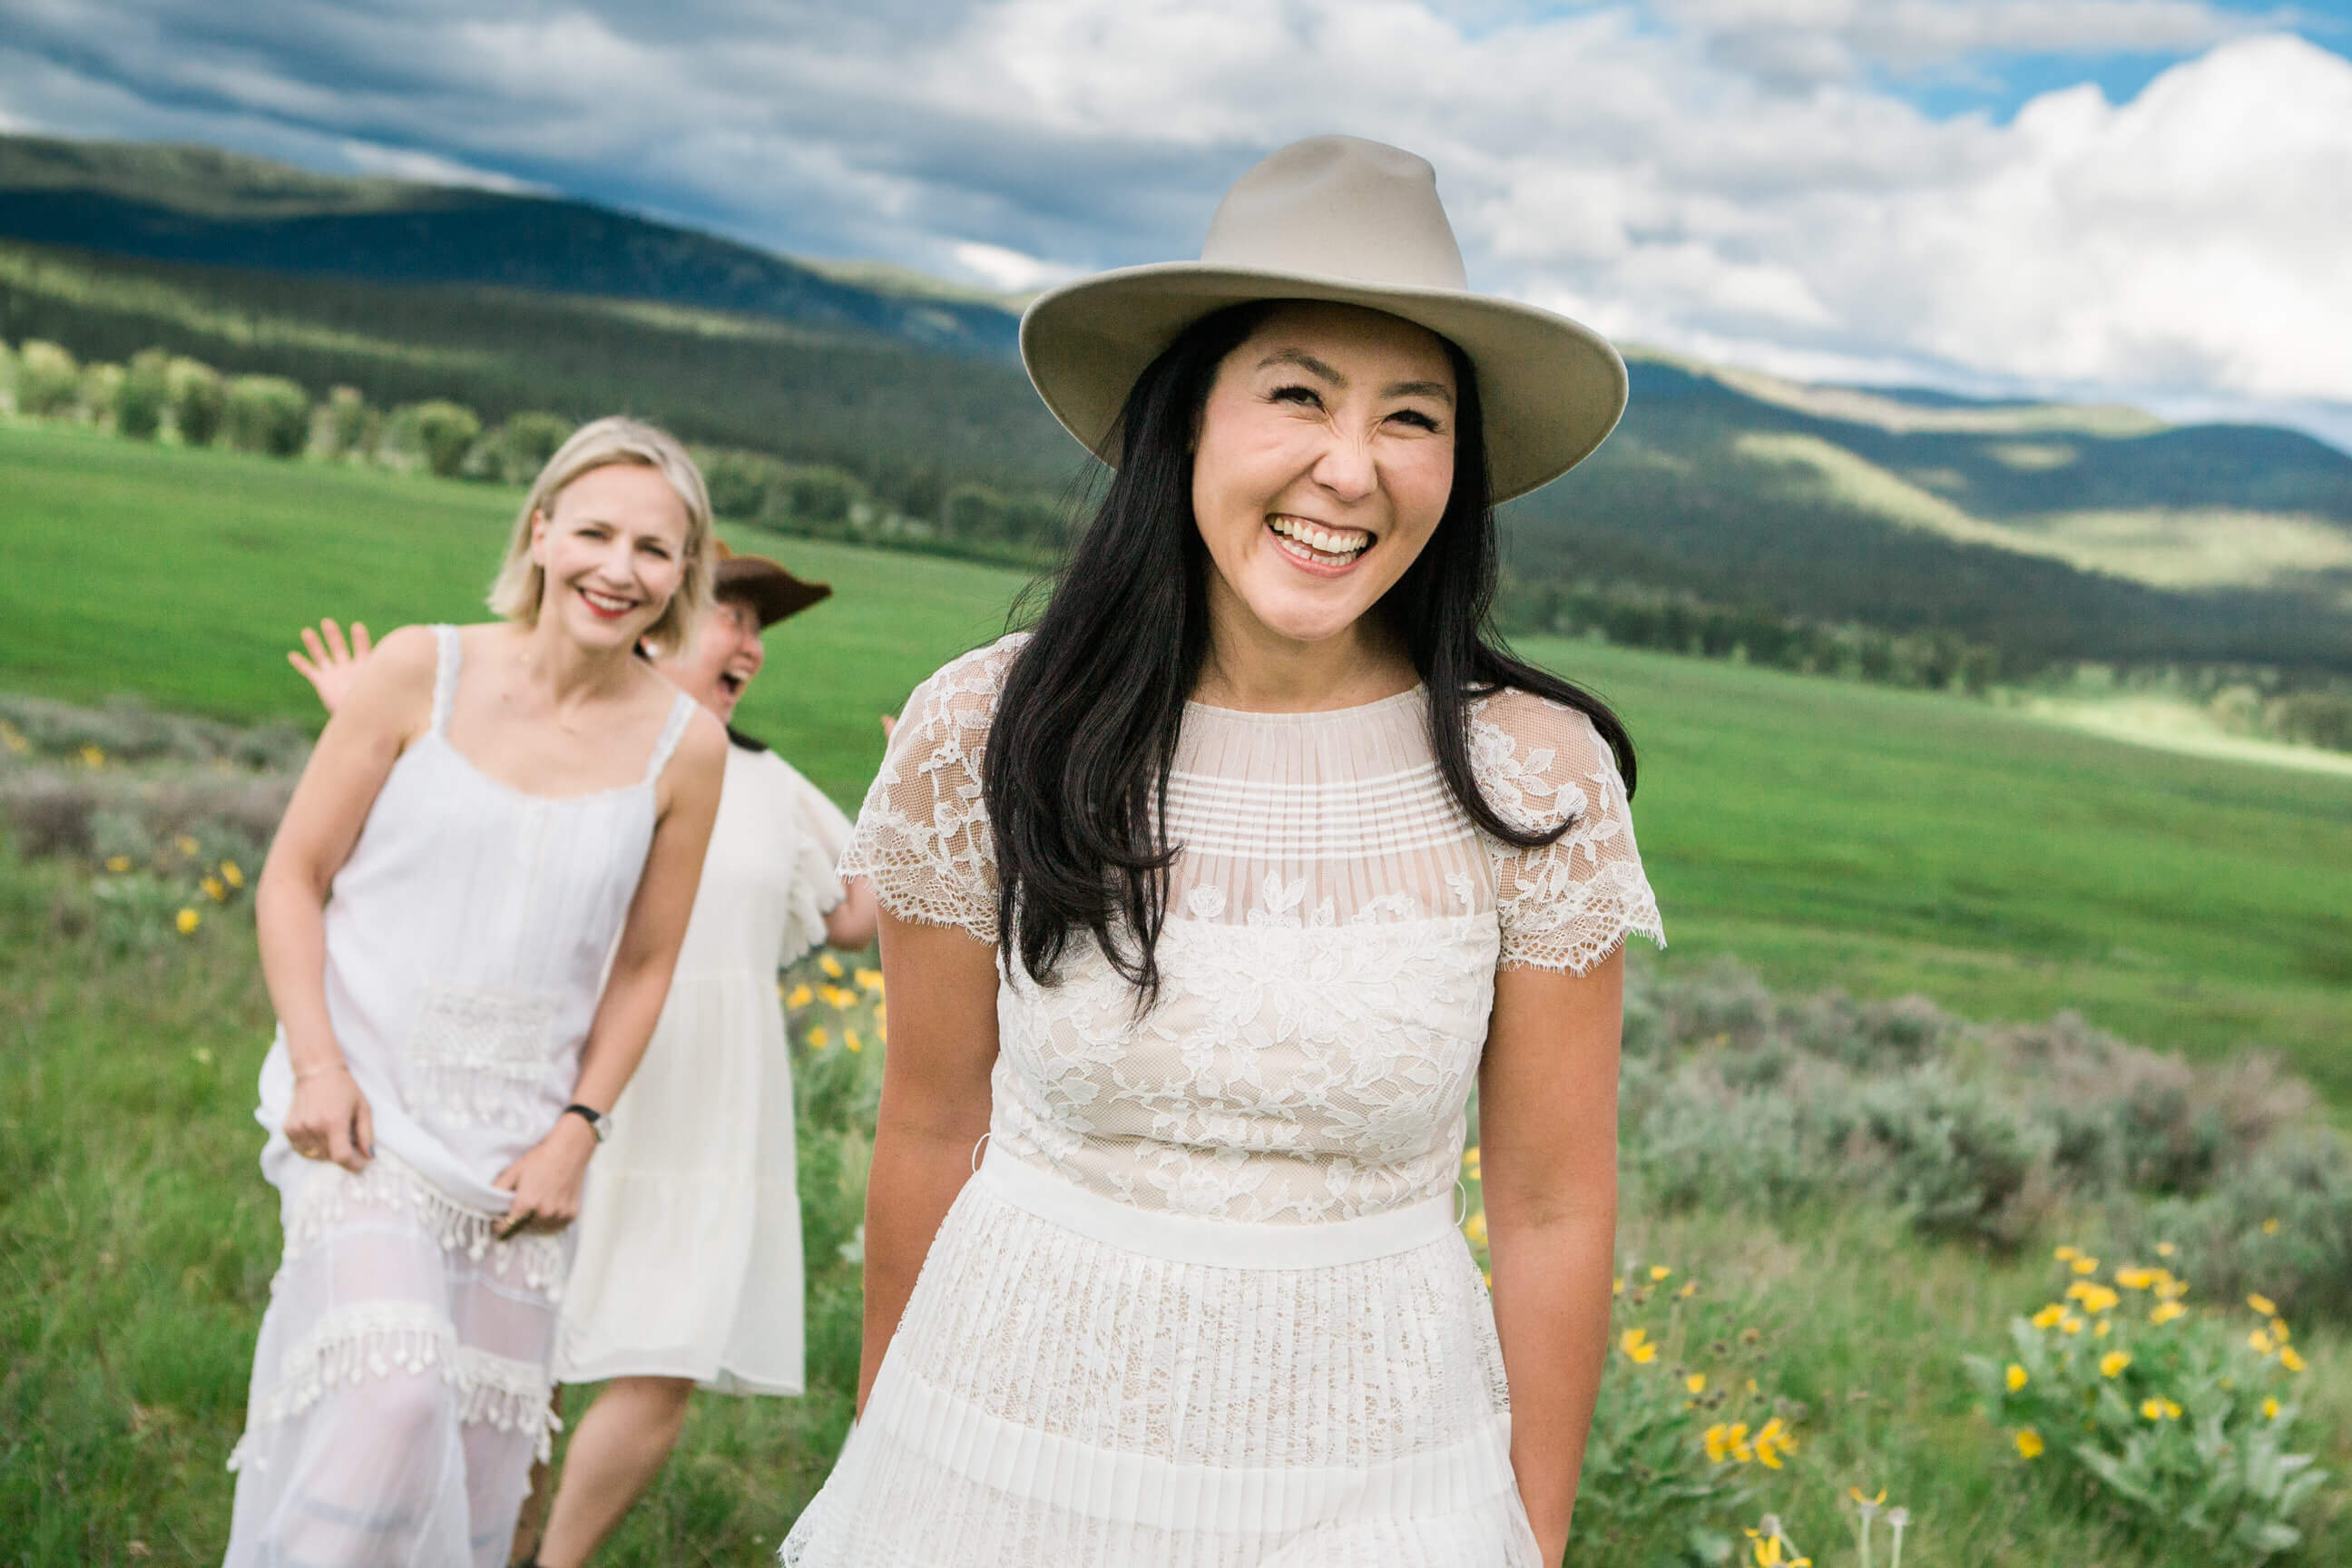 A woman smiles with her friends during their portrait session at Paws Up Resort in Montana